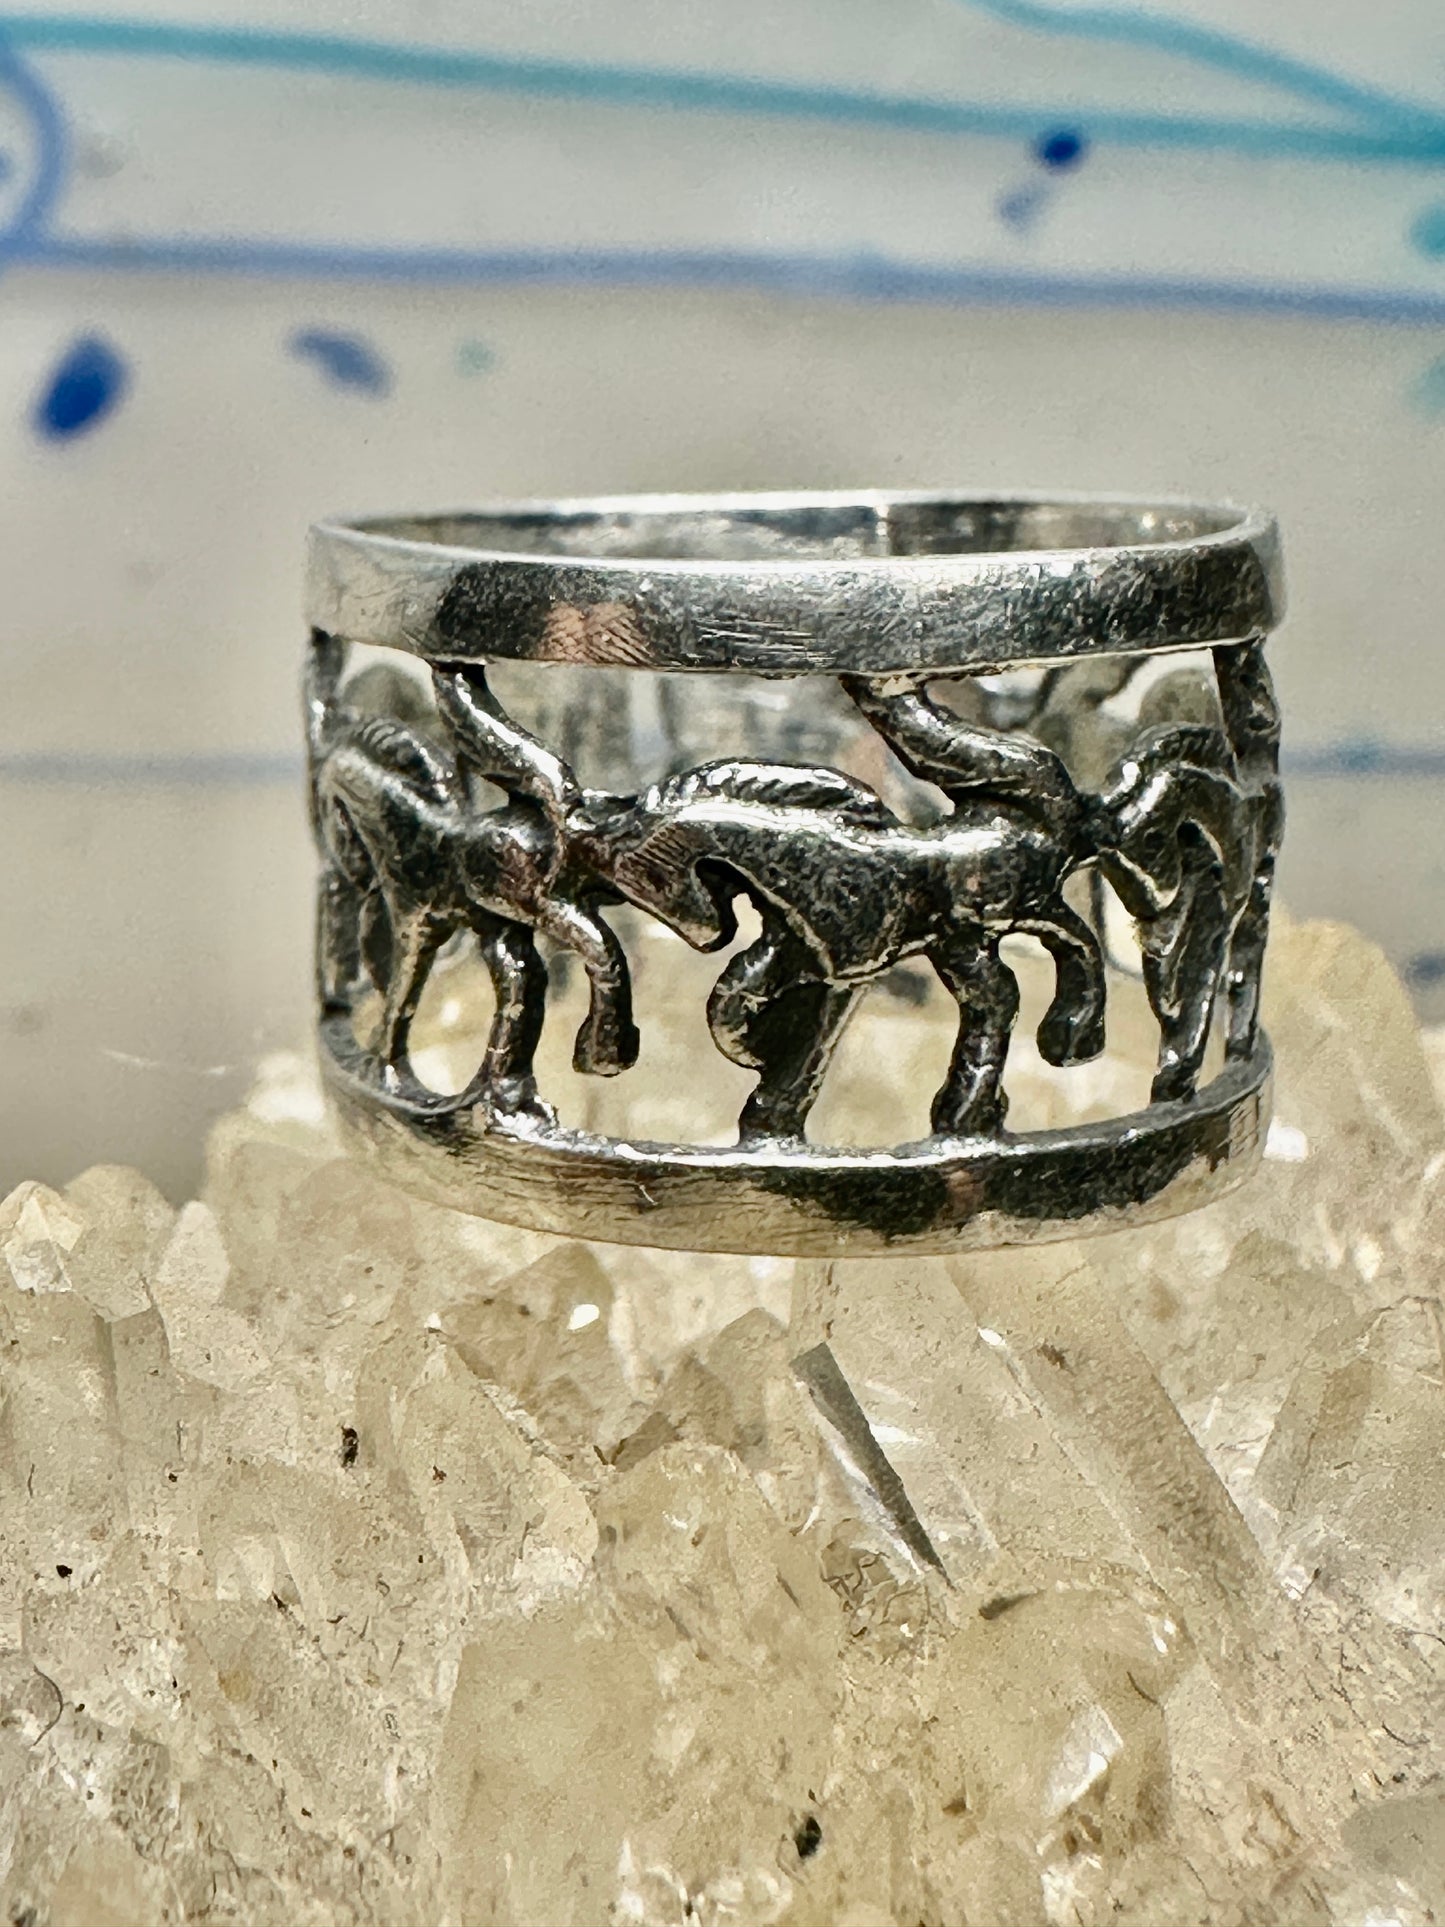 Horse ring Horses band size 5.50 sterling silver cowgirl women girls